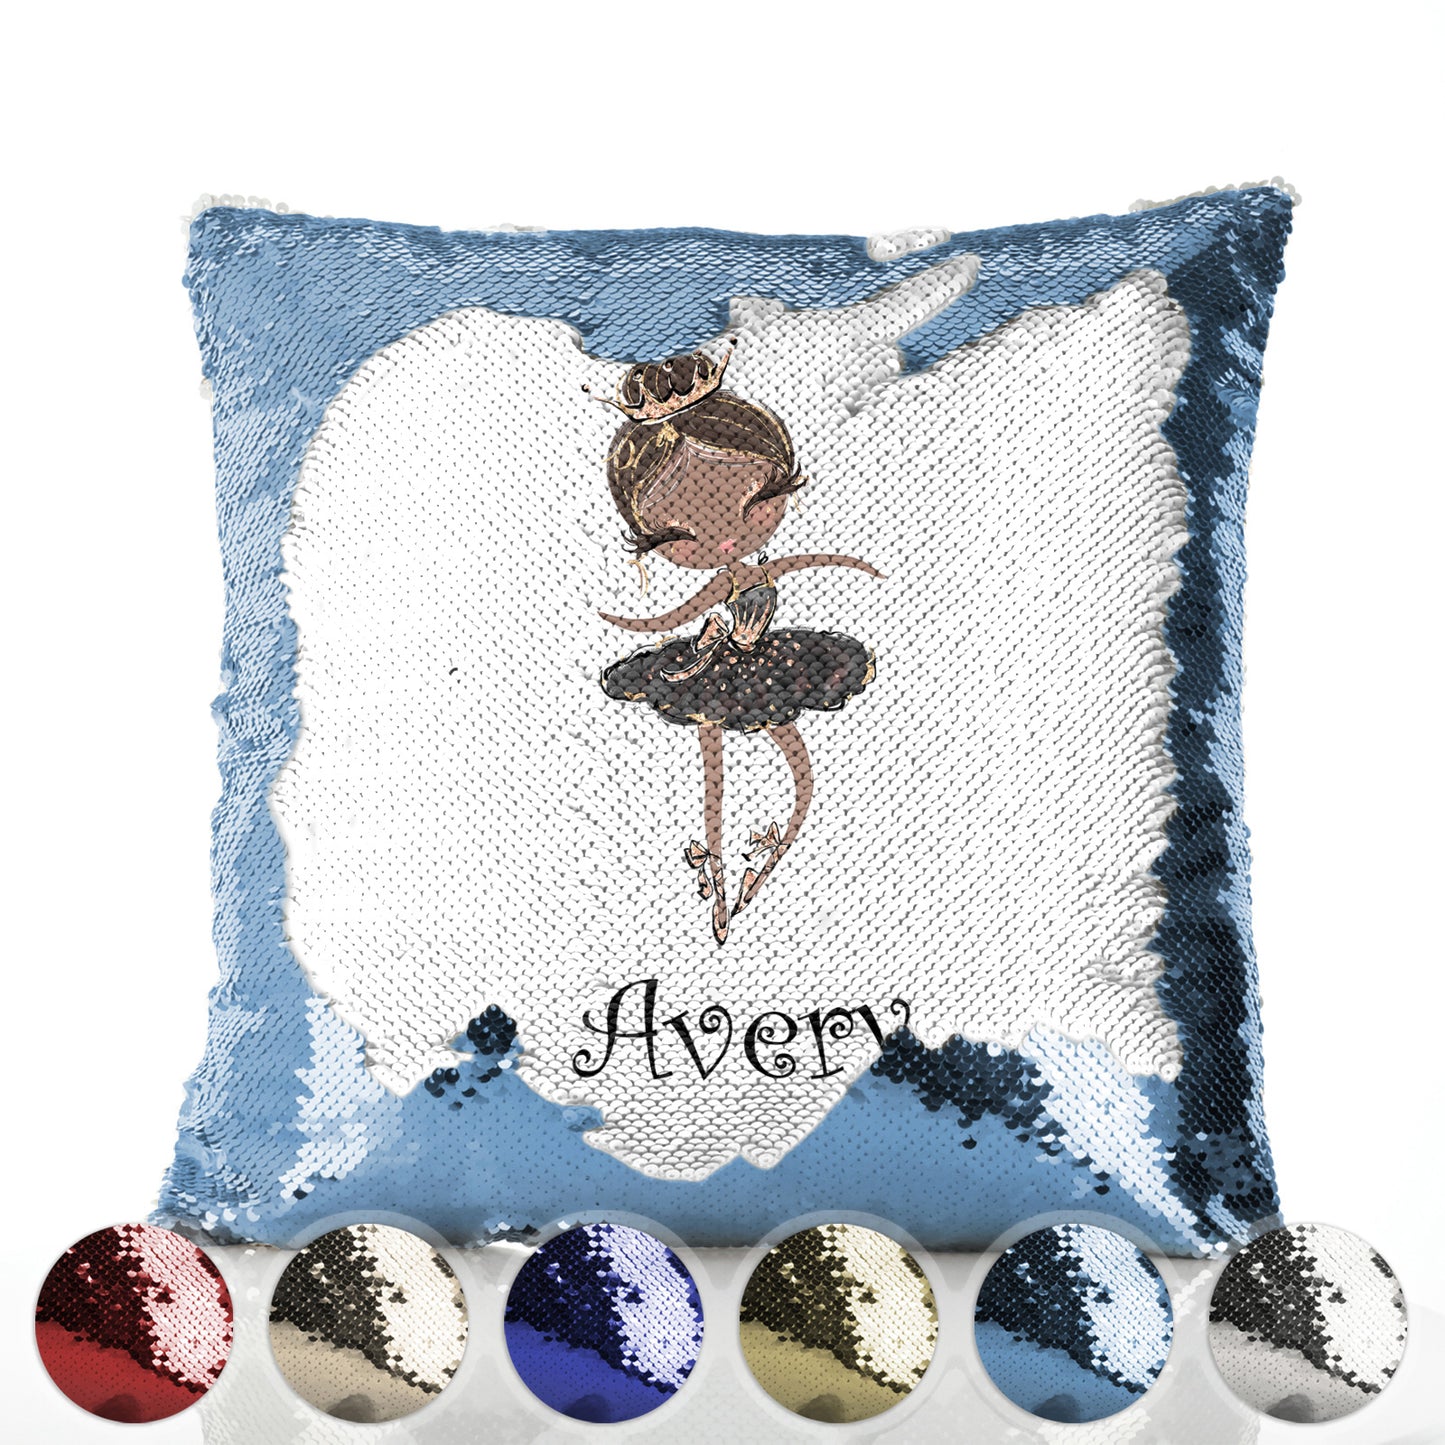 Personalised Sequin Cushion with Cute Text and Black Hair Black Dress Tiara Ballerina